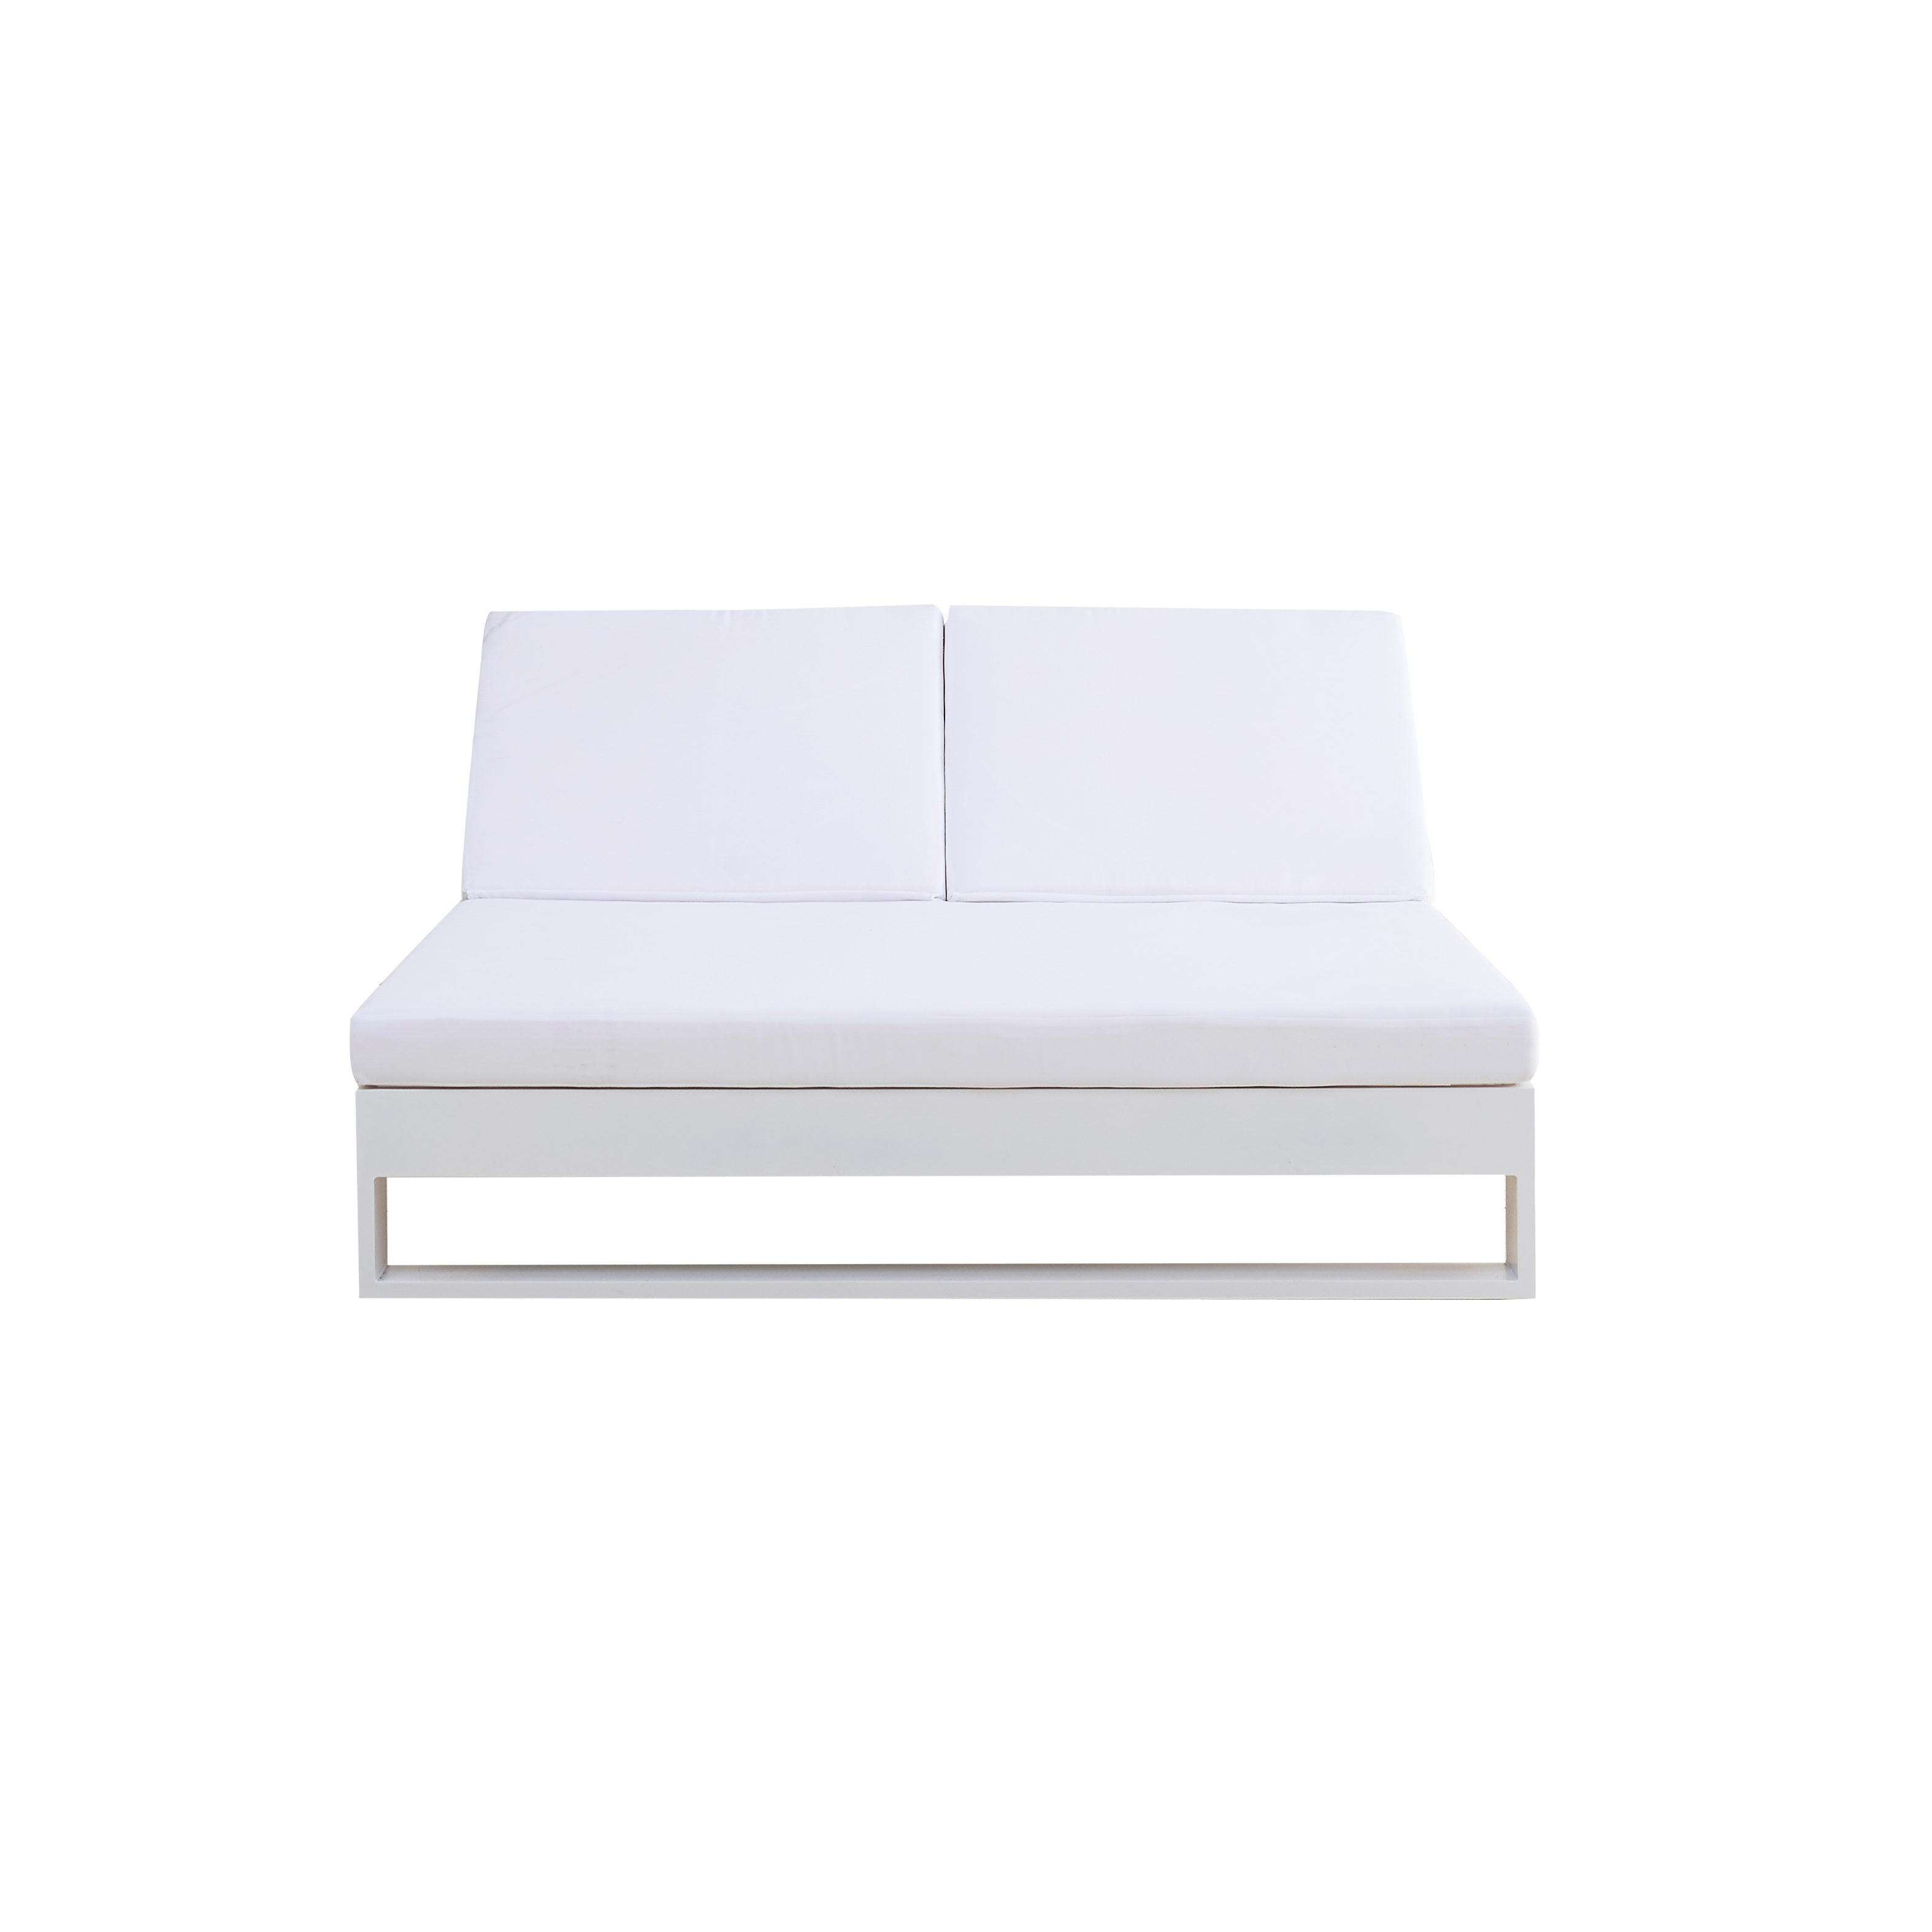 Golf kabini daybed S4